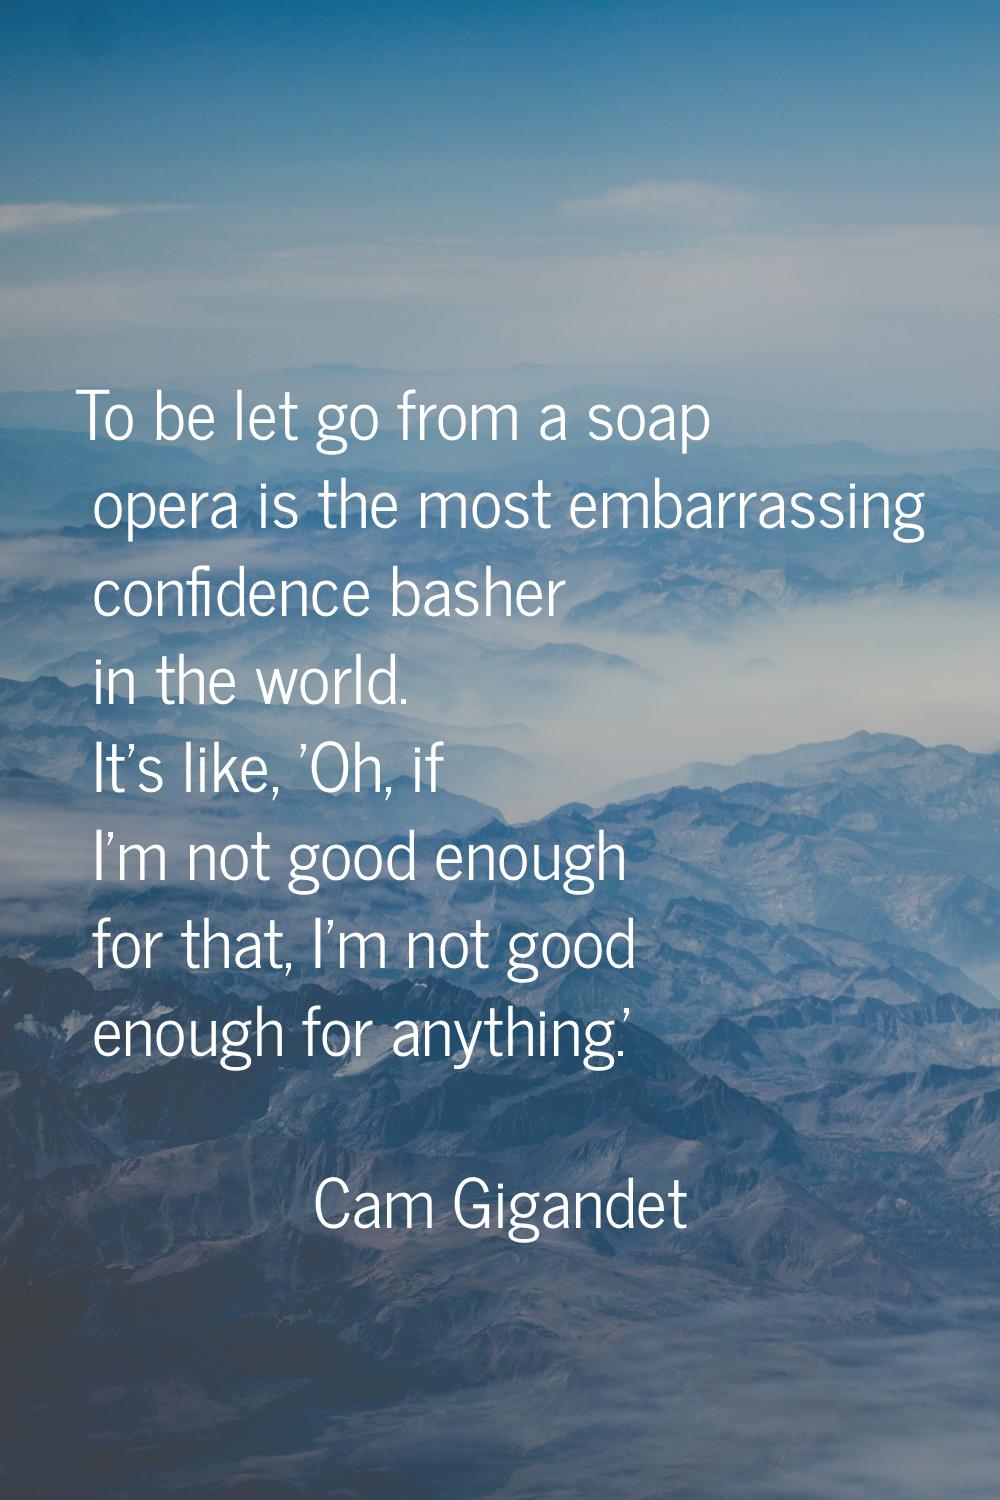 To be let go from a soap opera is the most embarrassing confidence basher in the world. It's like, 